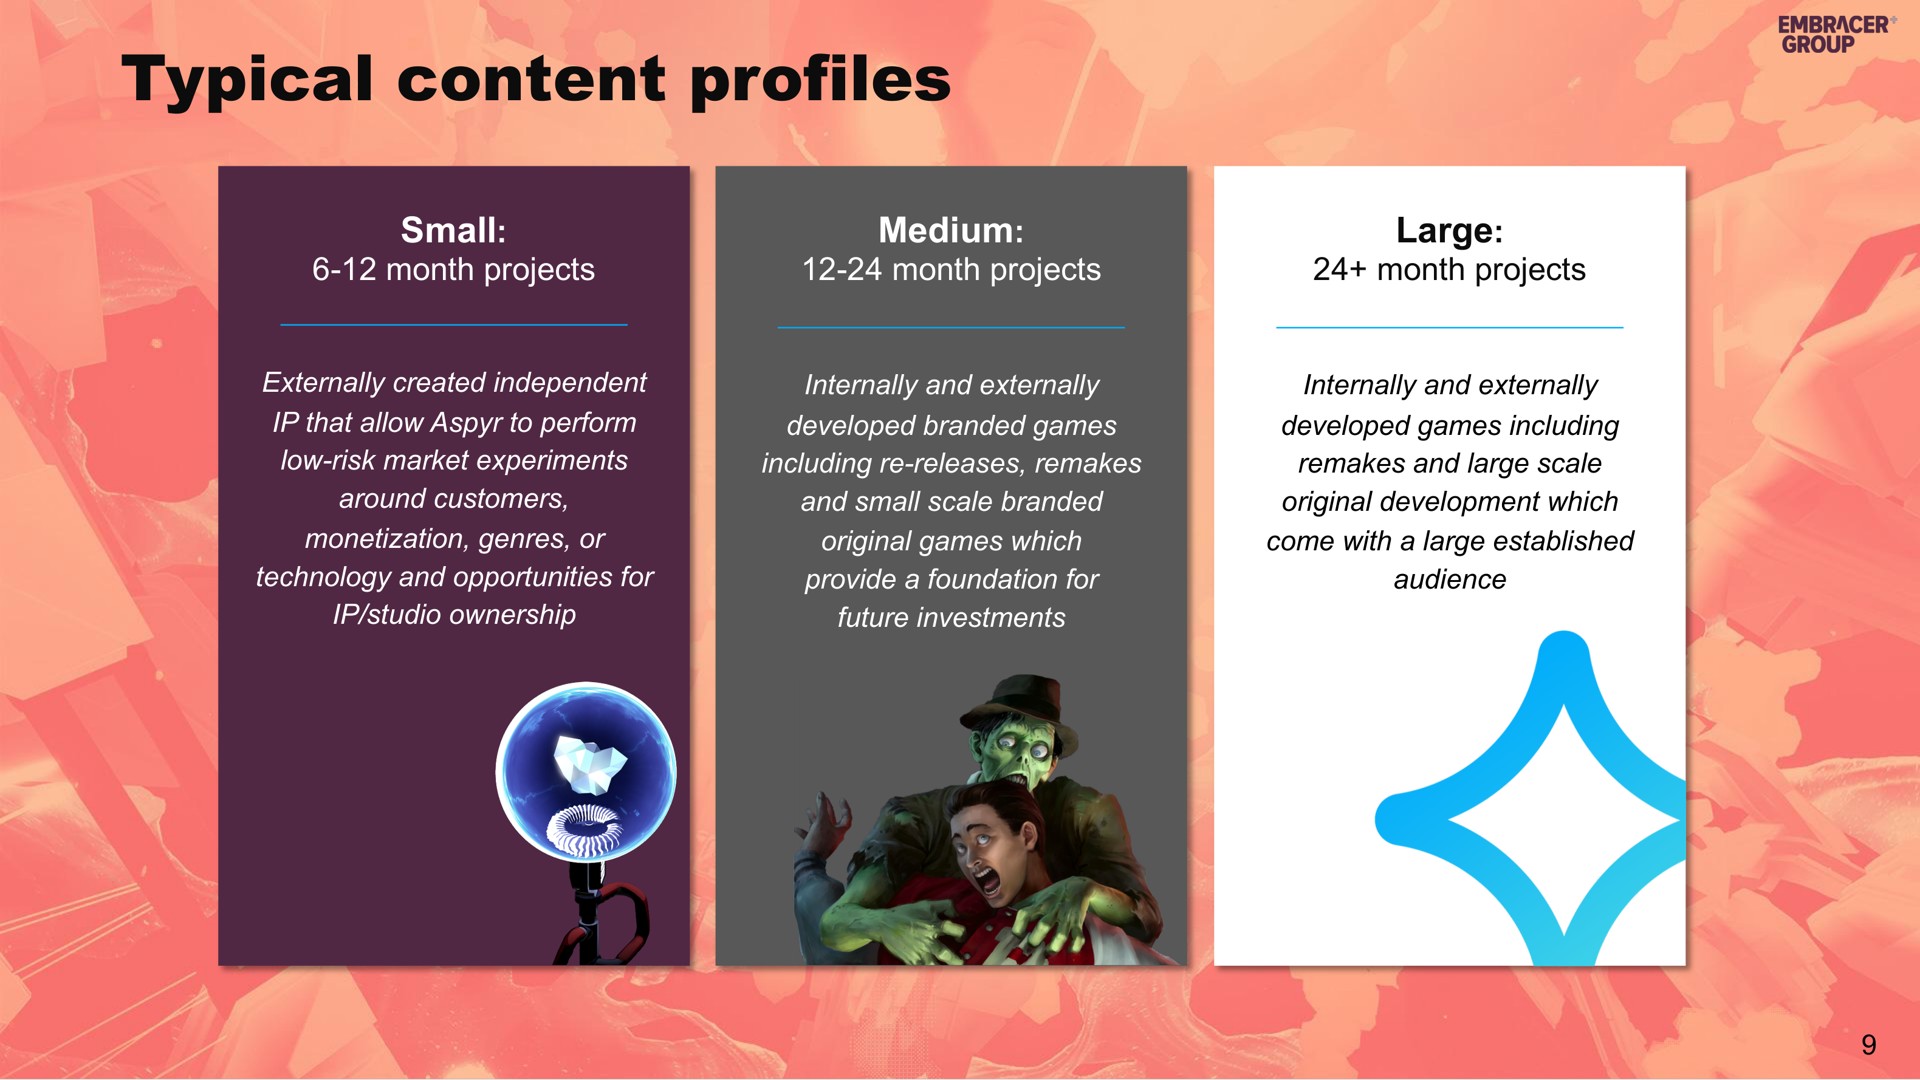 typical content profiles a | Embracer Group